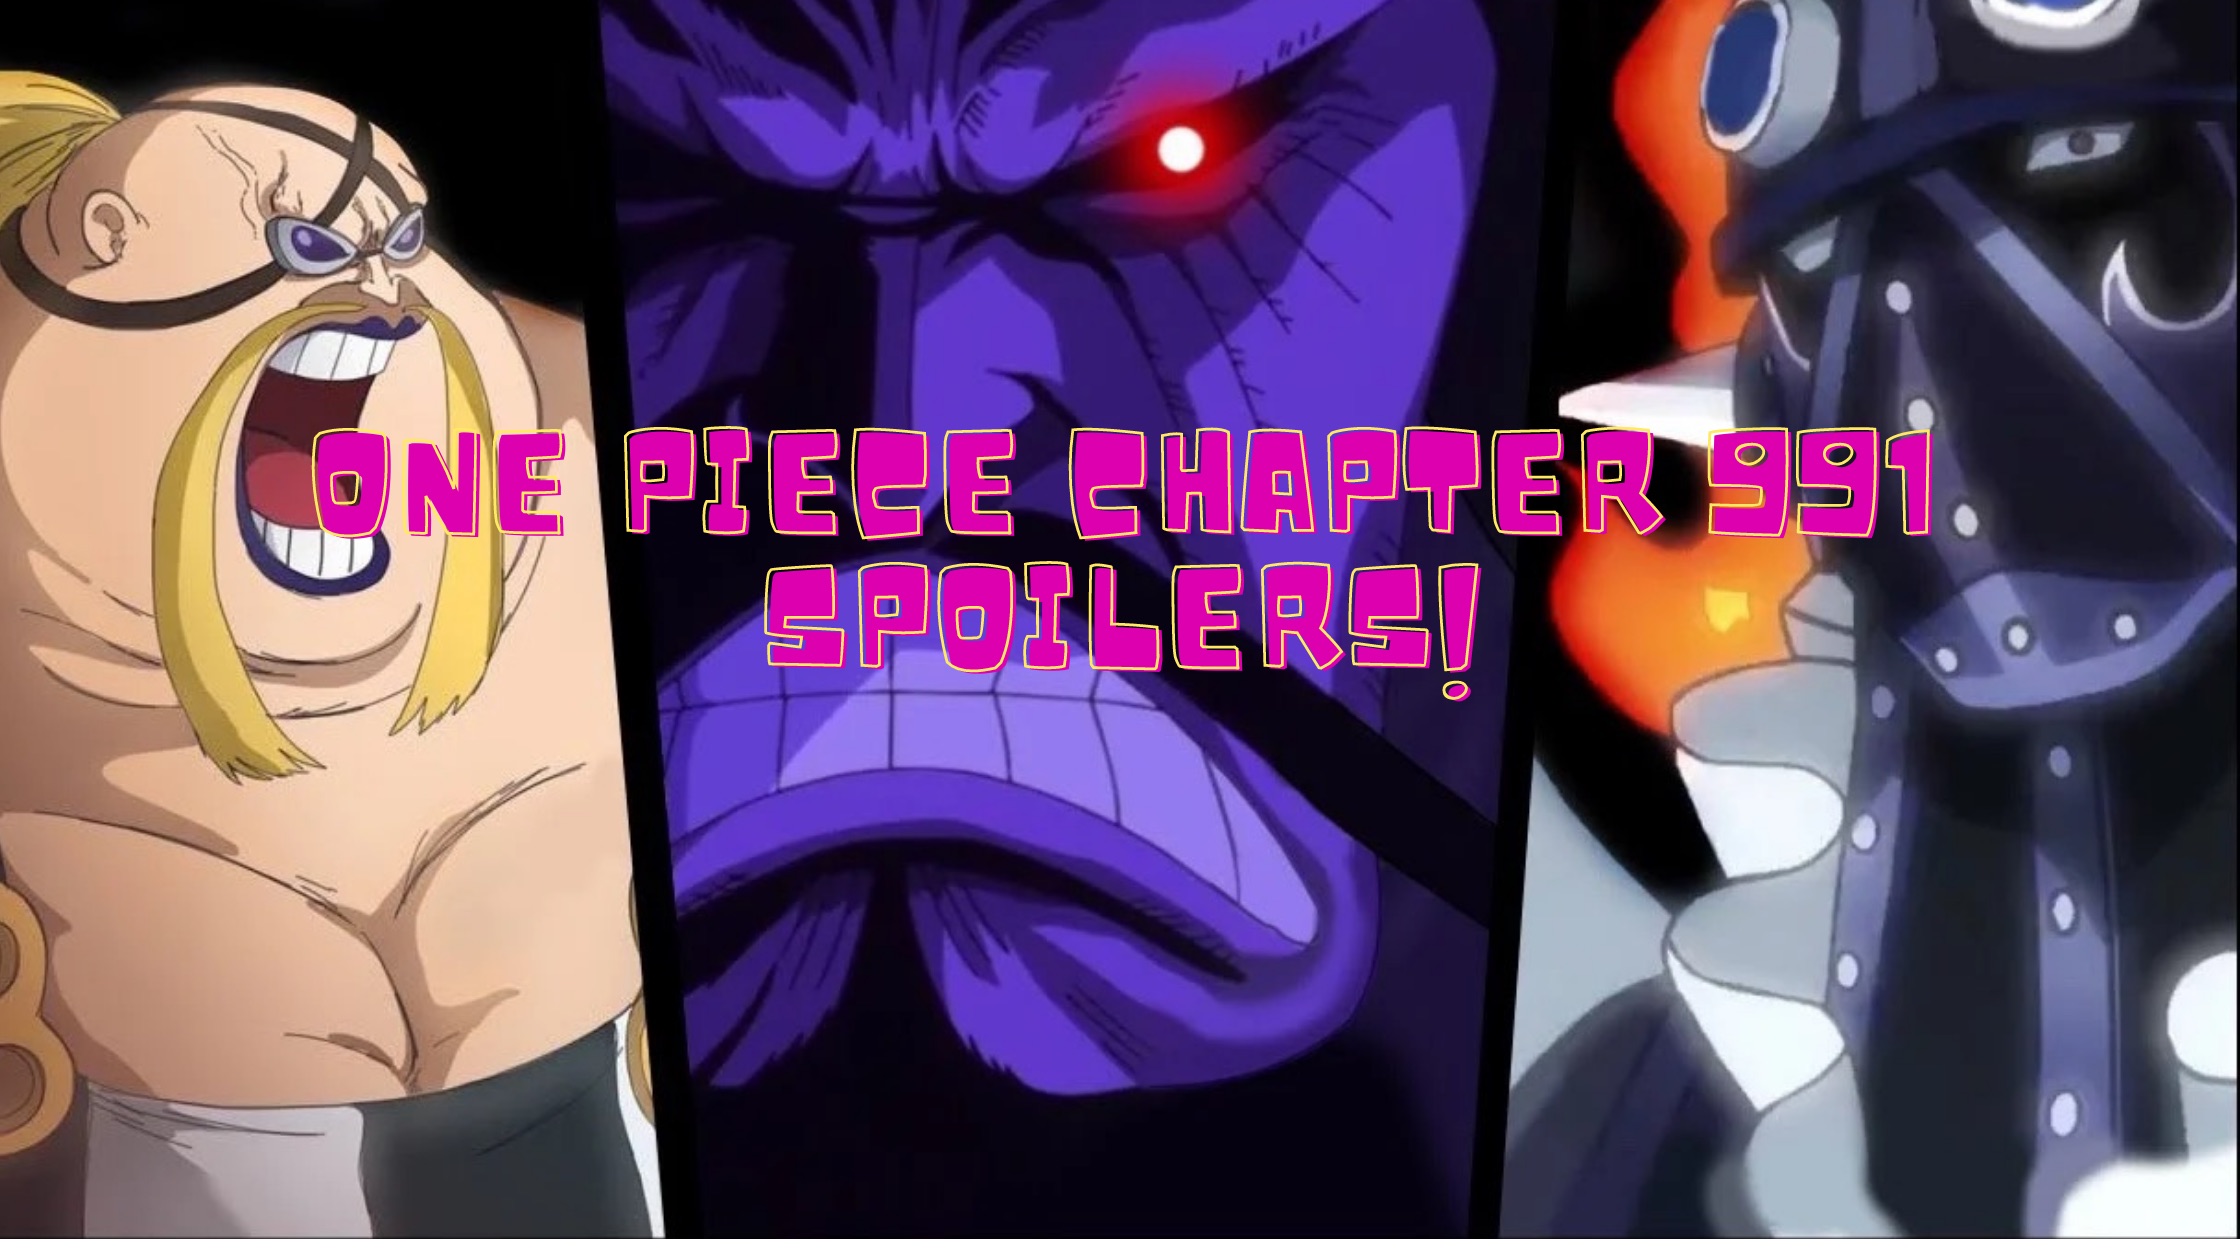 One Piece Chapter 991 Spoilers Confirmed Spoilers Of Chapter 991 Revealed Gizmo Sheets